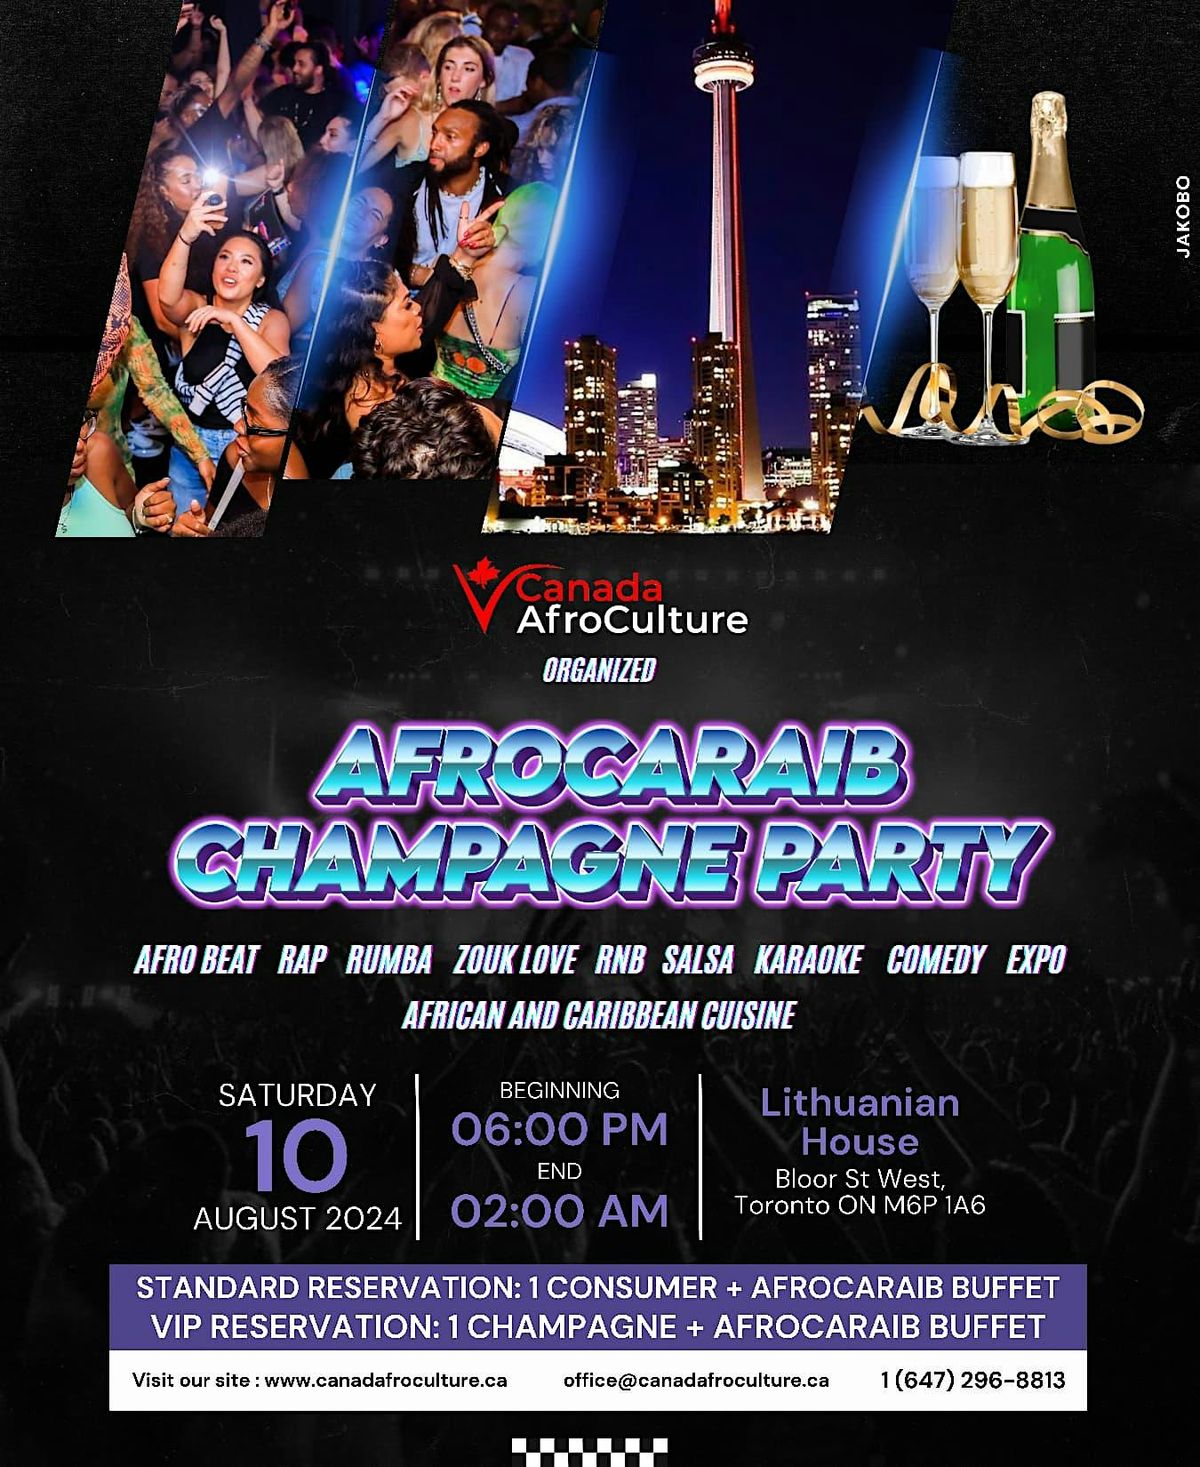 AFROCARAIB CHAMPAGNE PARTY